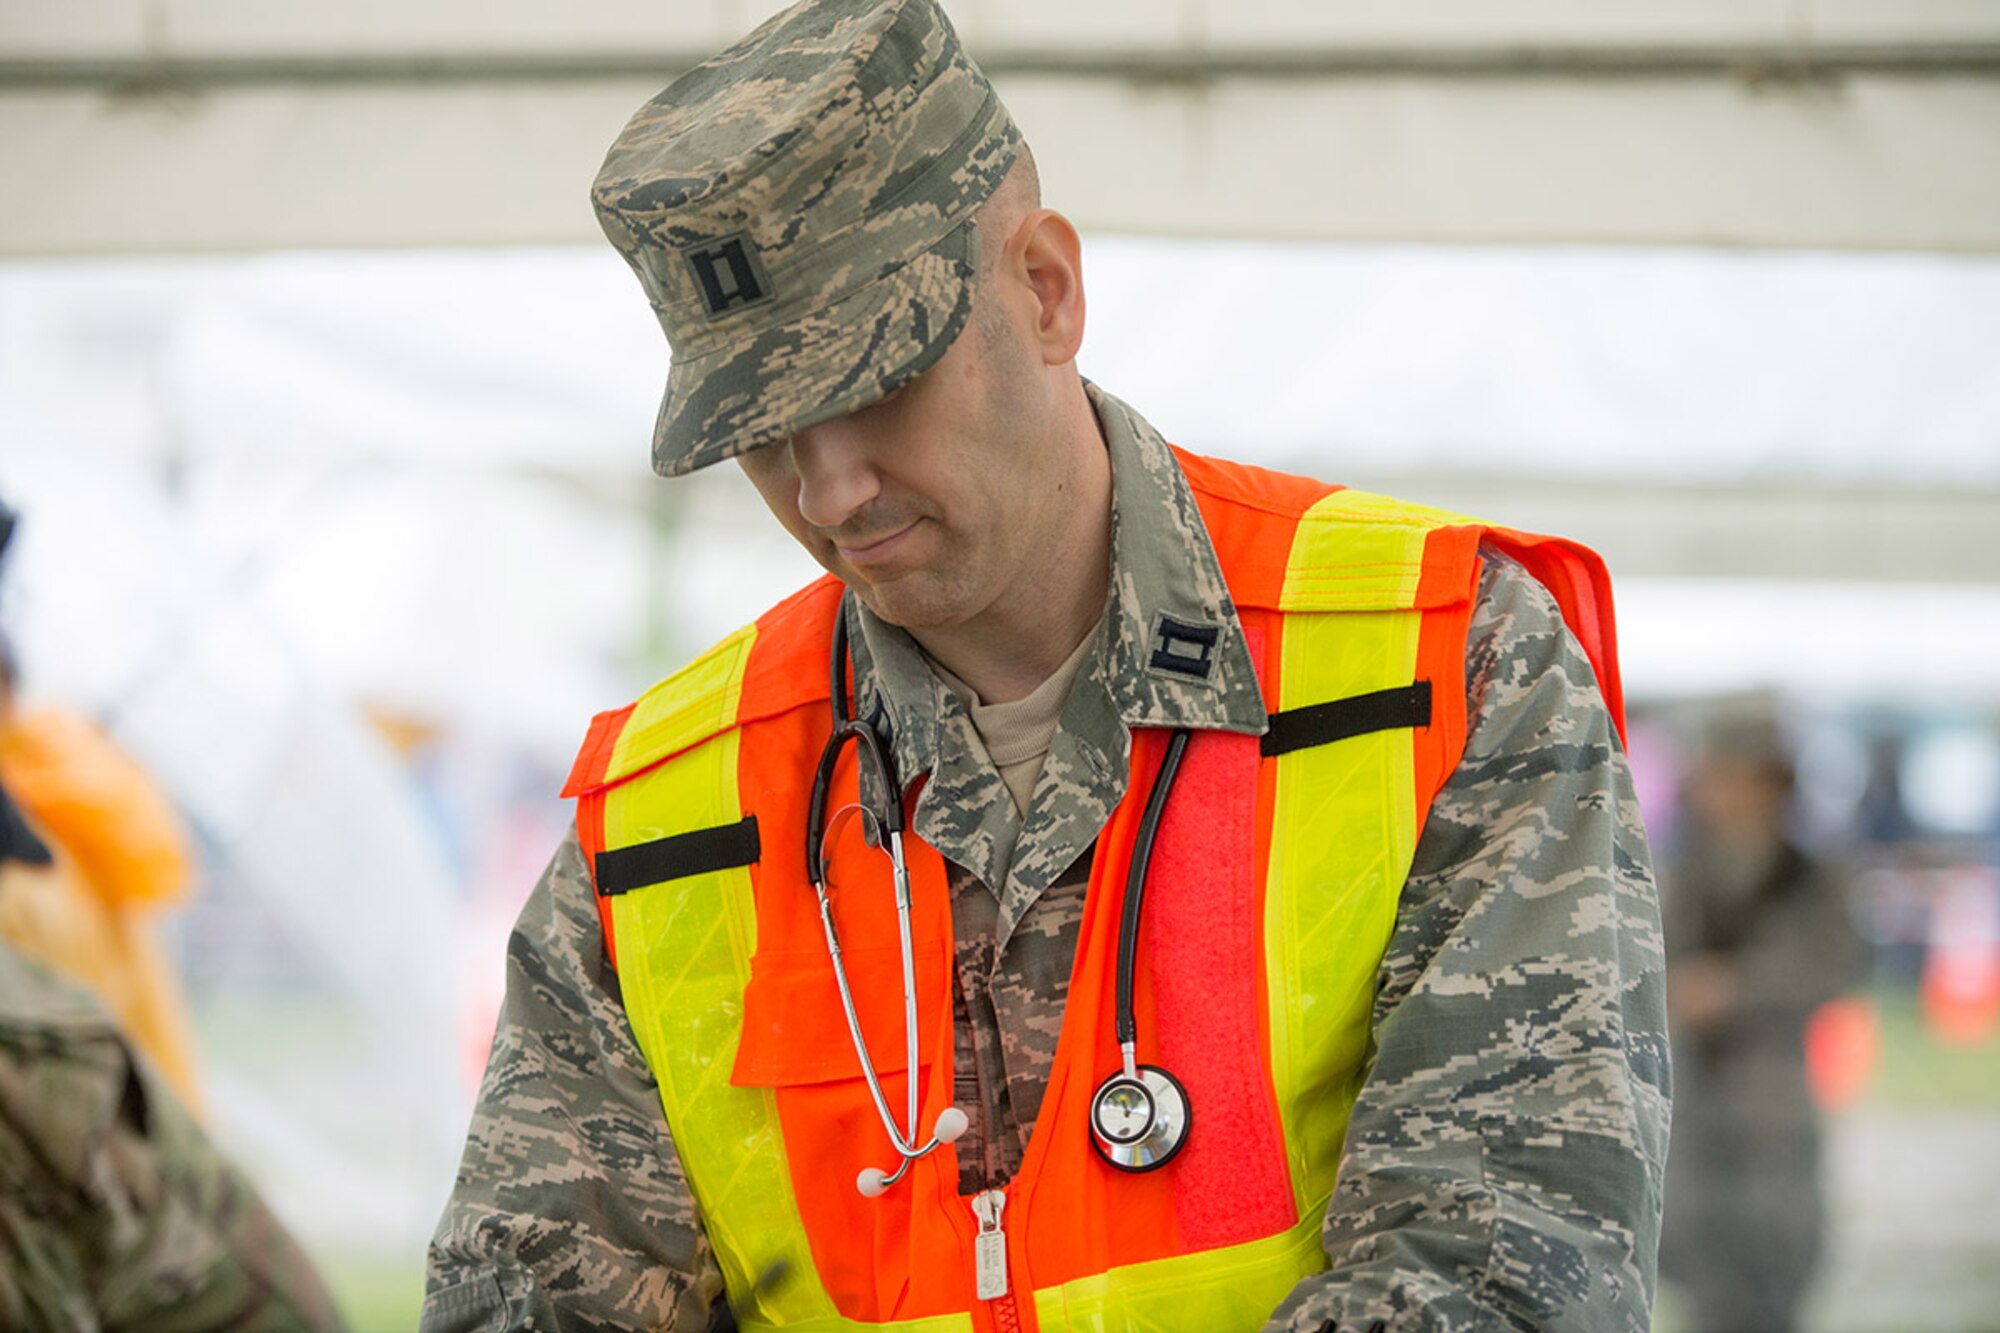 Capt. Robert Alexander, 374th Medical Group physician assistant, prepares to treat the injuries of a simulated patient during the Kanagawa Prefecture Government Joint Disaster Drill at Japan Ground Self-Defense Force Camp Takeyama, Japan, Sept. 11, 2016. Yokota Airmen have participated in the drill since 2014 in an effort to enhance emergency response capabilities with the Japan Self-Defense Forces and local Japanese emergency response organizations. (U.S. Air Force photo by Senior Airman Delano Scott/Released)